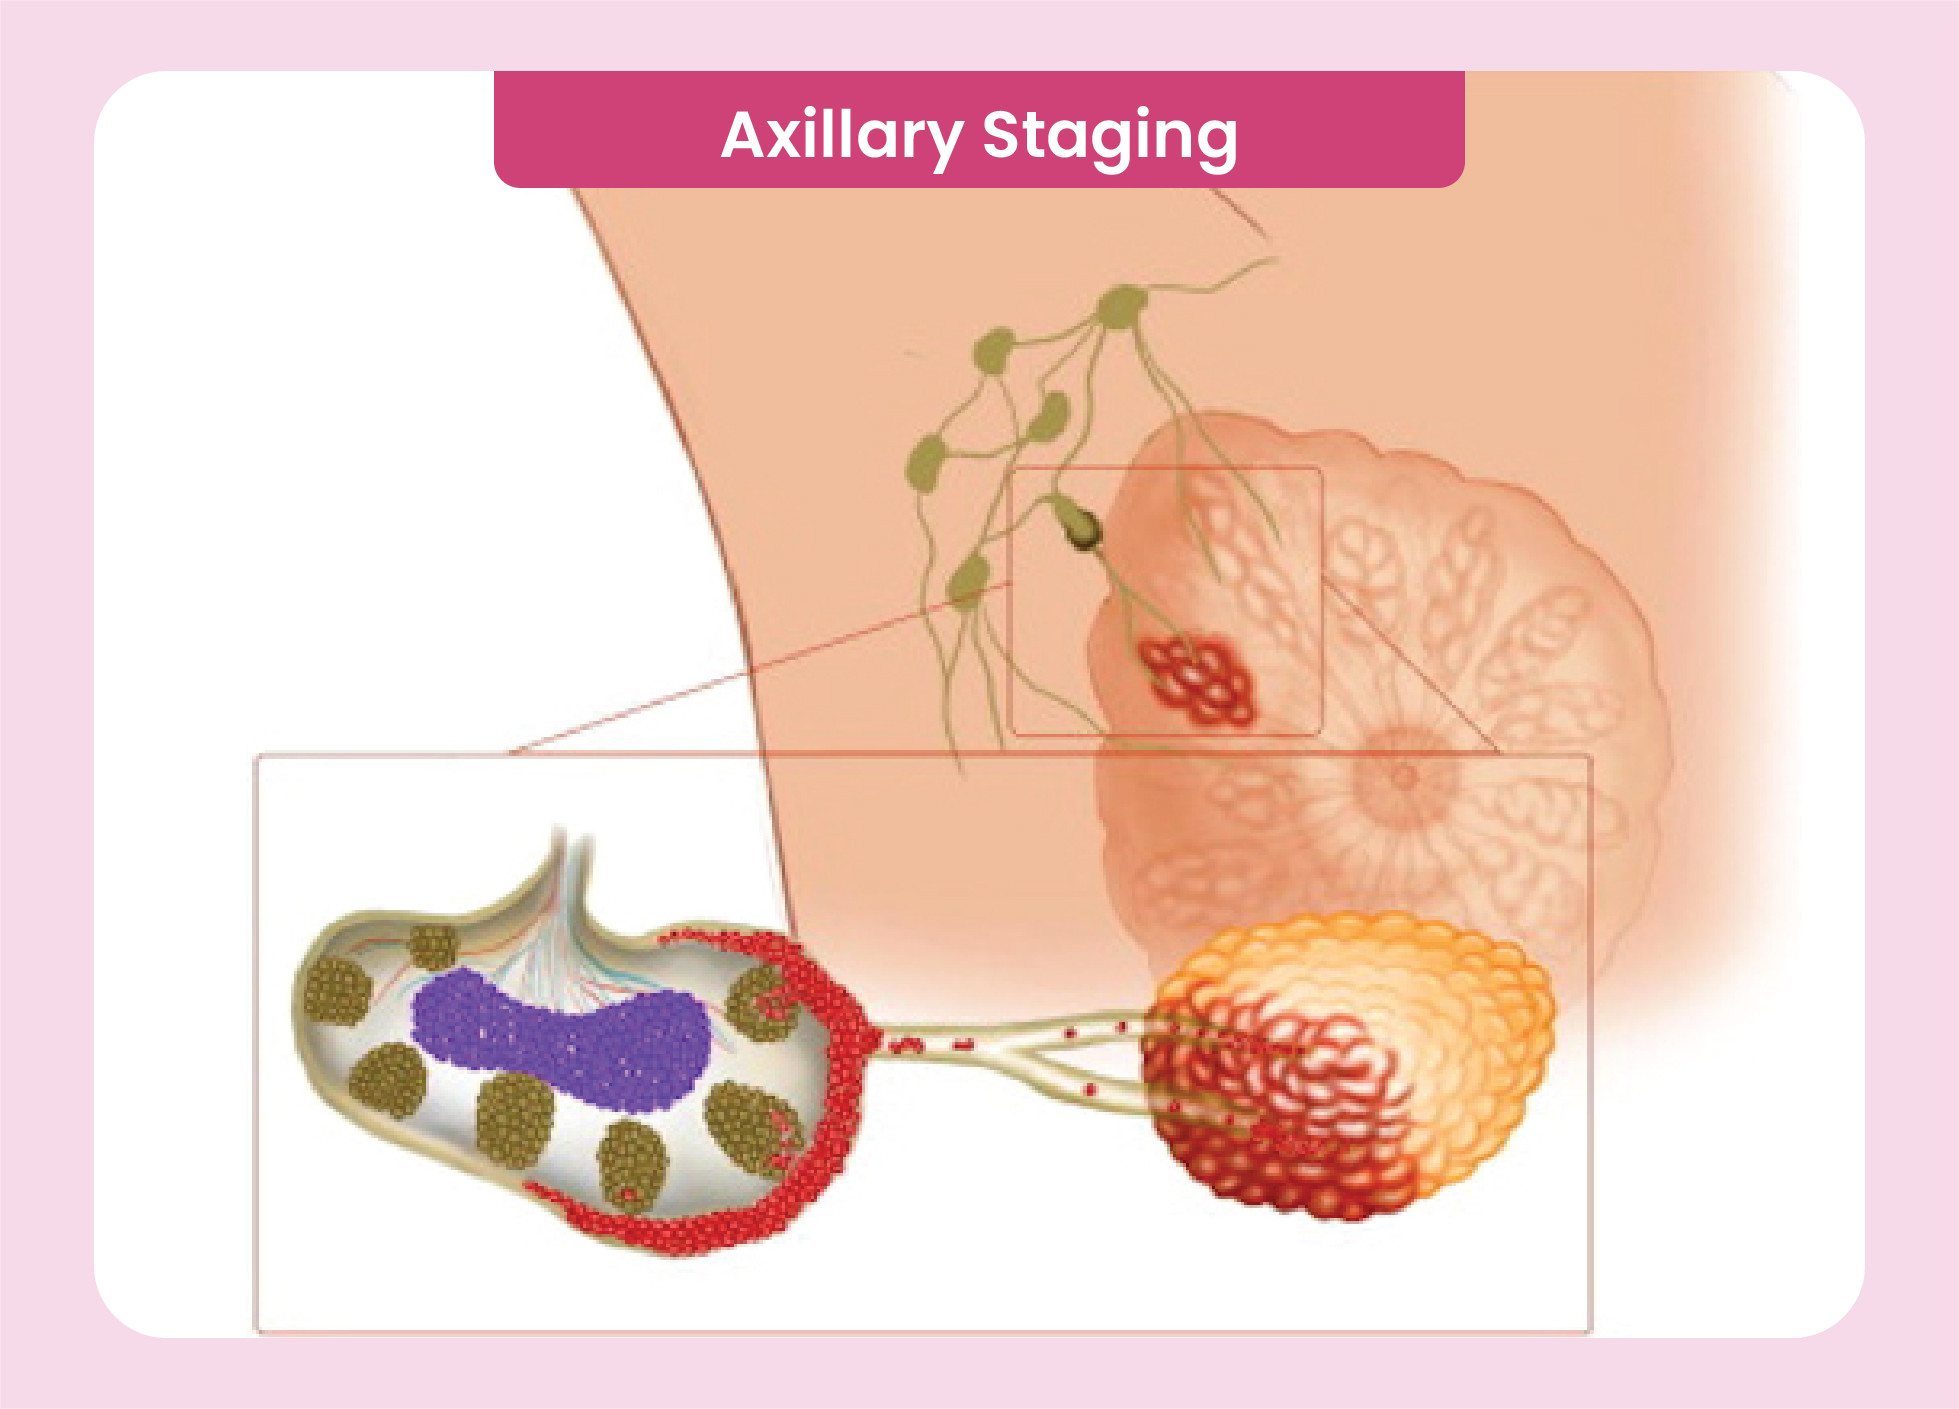 Axillary Staging in Breast Cancer - Sentinel Lymph Node Biopsy